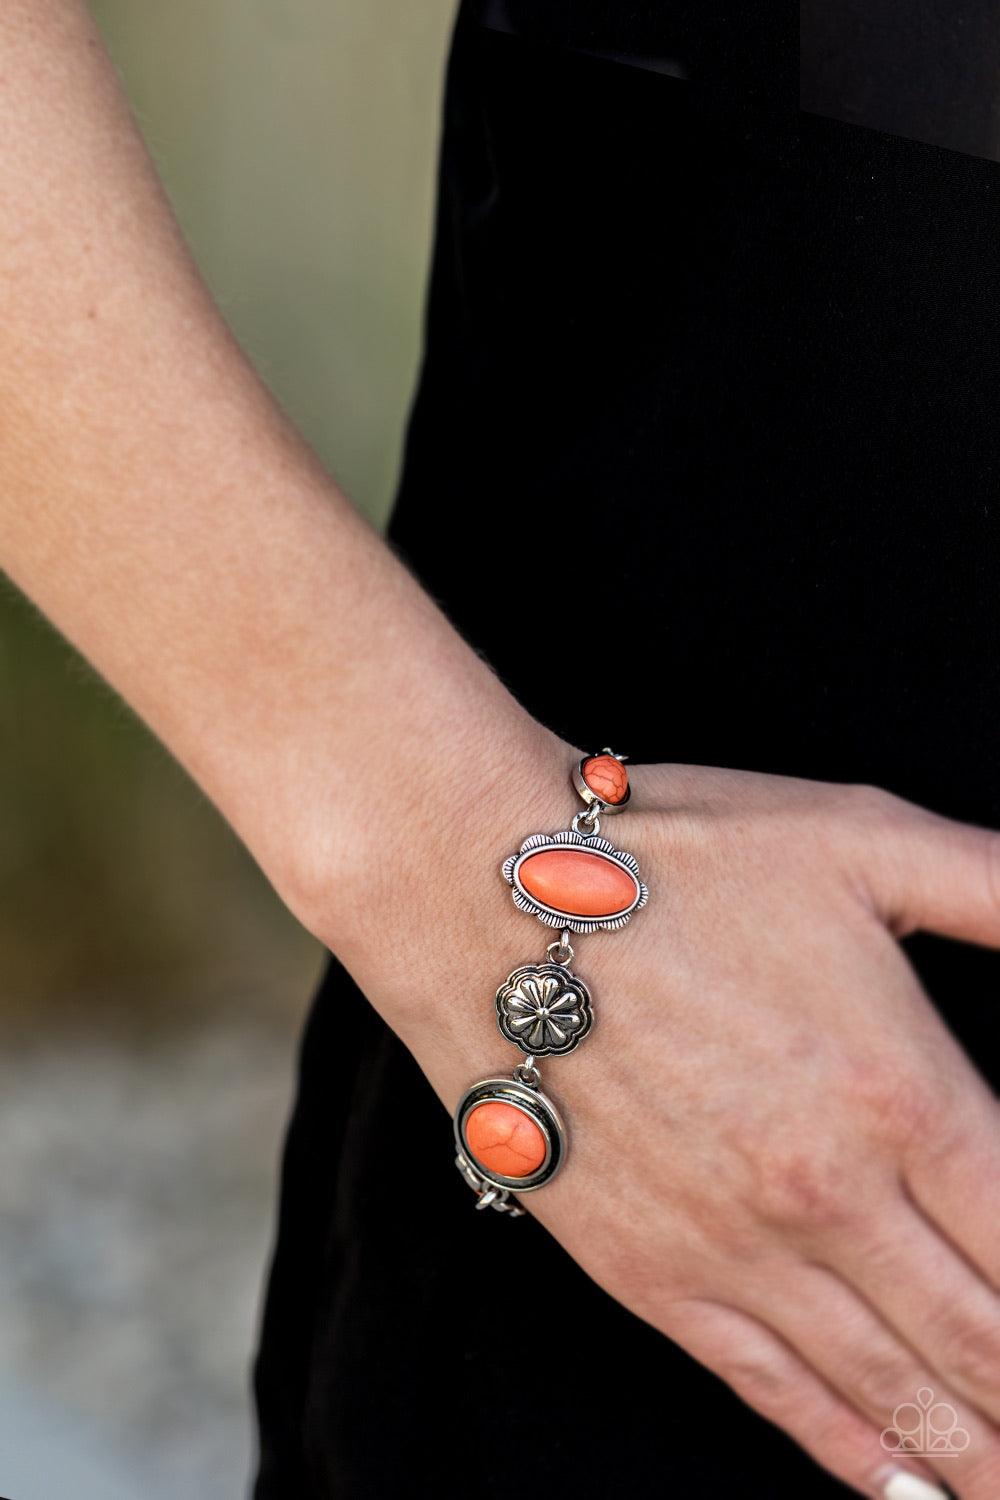 Paparazzi Accessories Gorgeously Groundskeeper - Orange a collection of antiqued silver frames link with a decorative floral charm around the wrist for a seasonal flair. Features an adjustable clasp closure. Jewelry